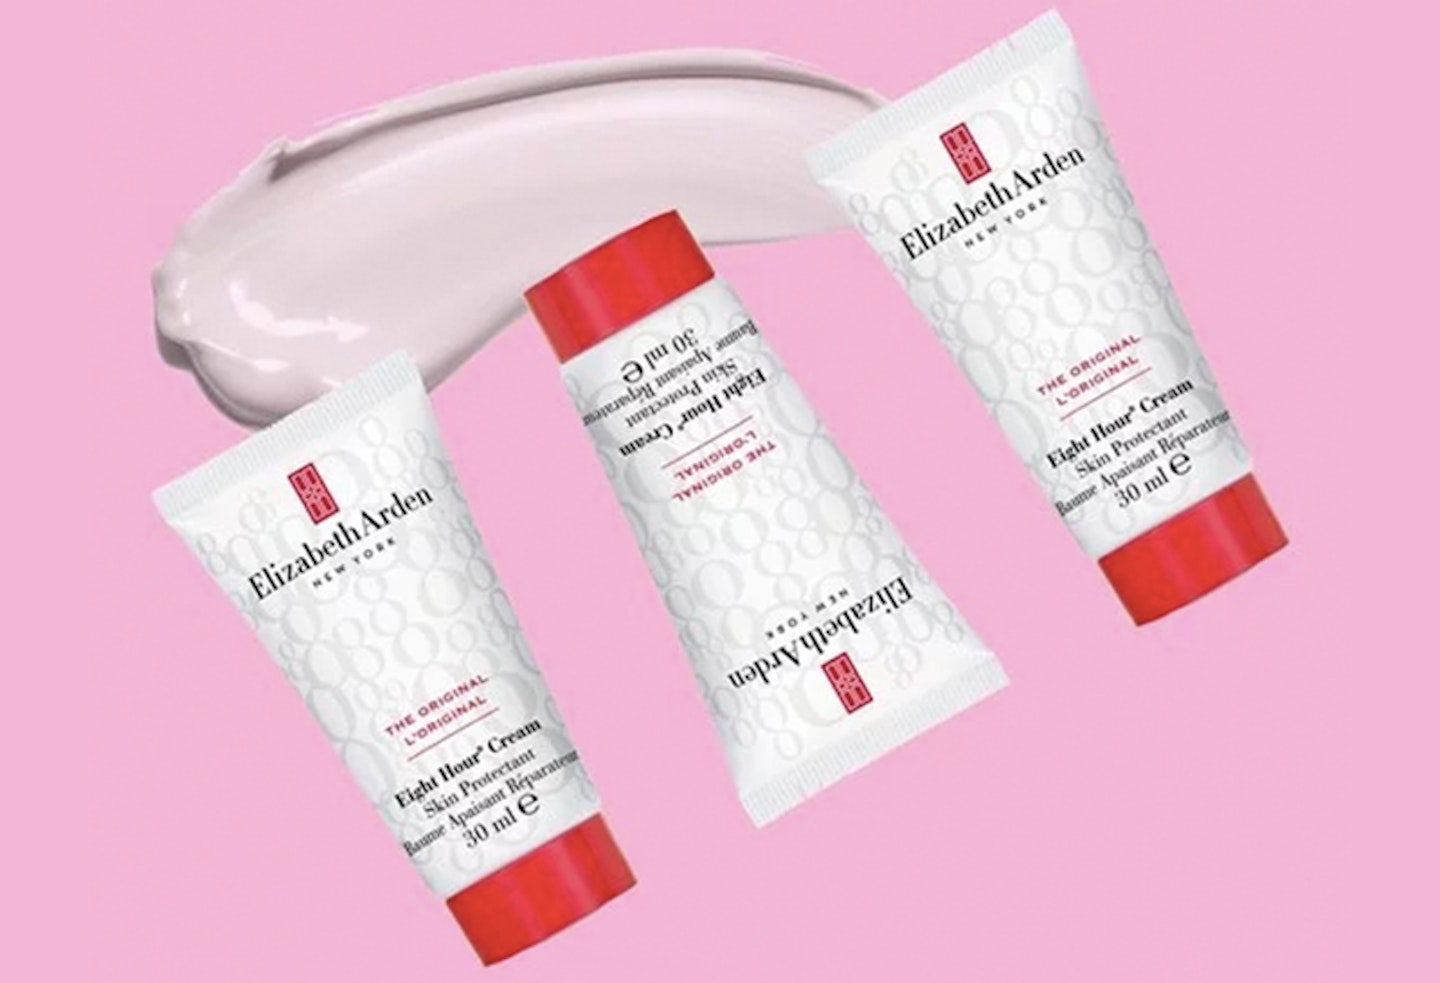 The Elizabeth Arden’s Eight Hour Cream dupe everyone is talking about